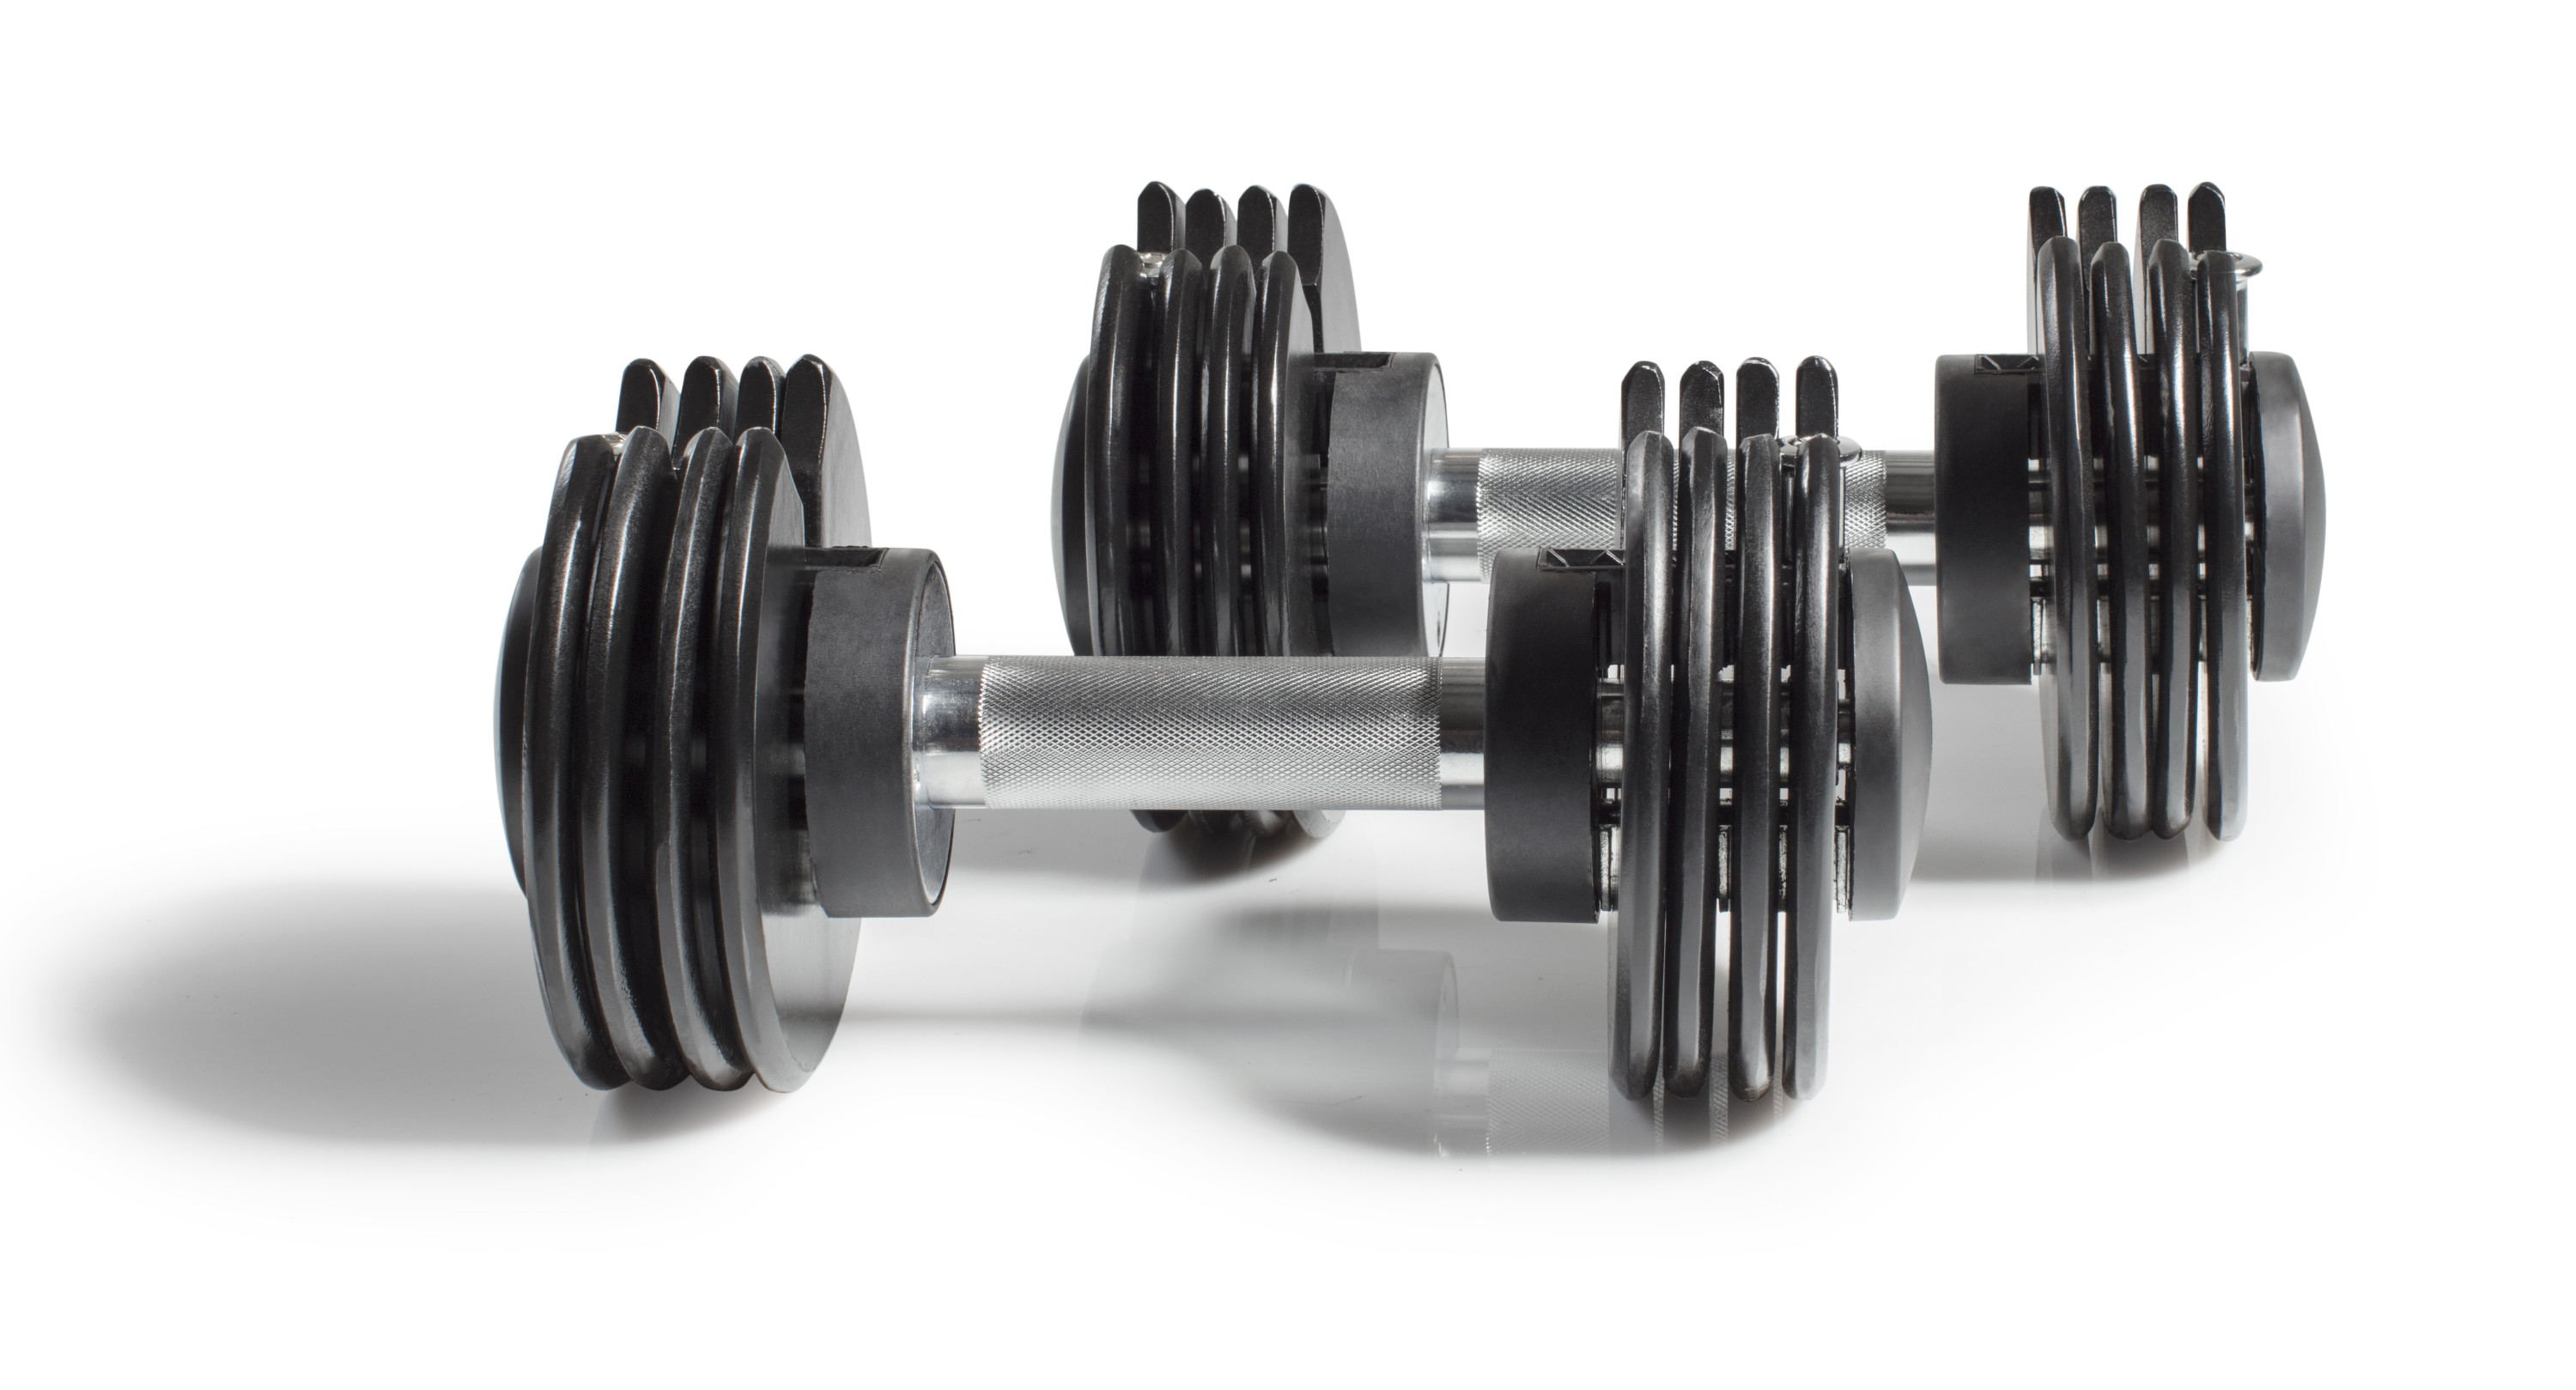 NordicTrack 12.5 lb. Adjustable Dumbbells with Weight Stands, Sold as Pair - image 1 of 10